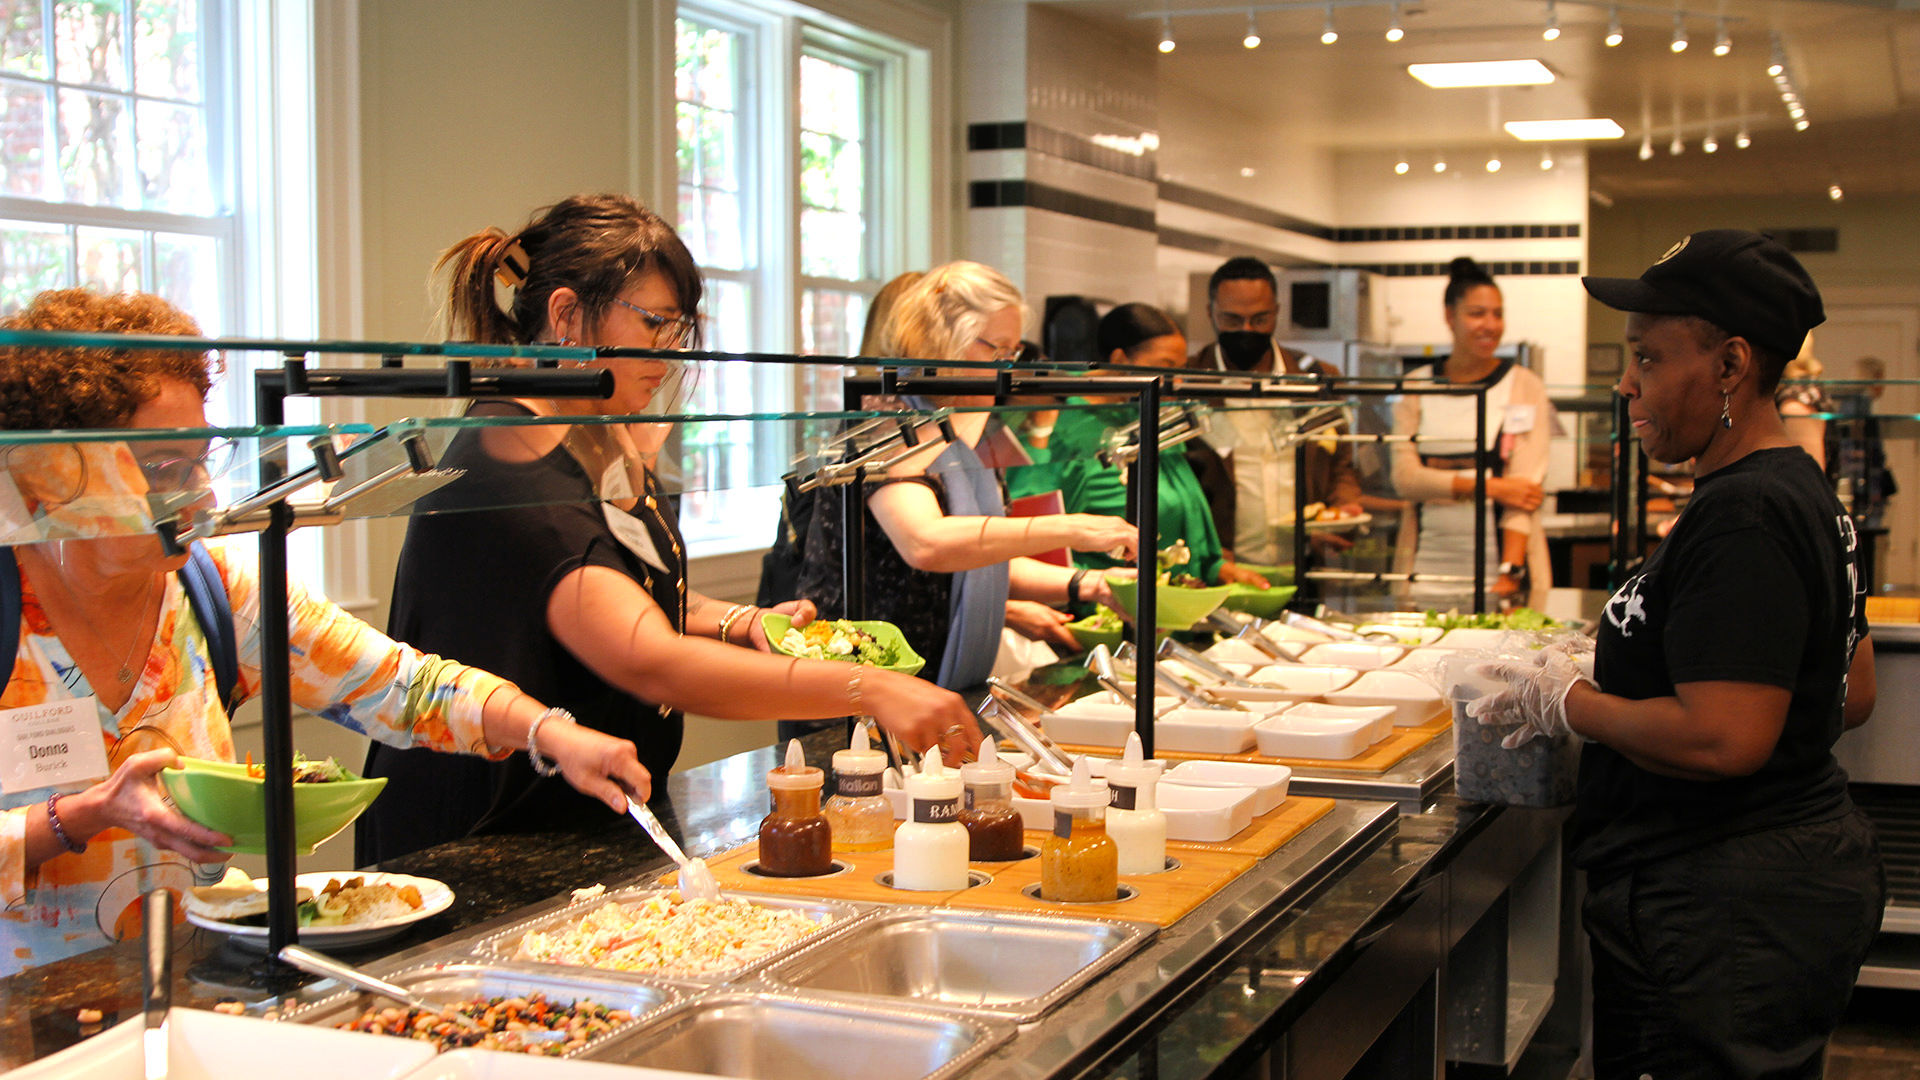 Attendees fill their plates at the salad bar in the Dining Hall during the Guilford Dialogues.